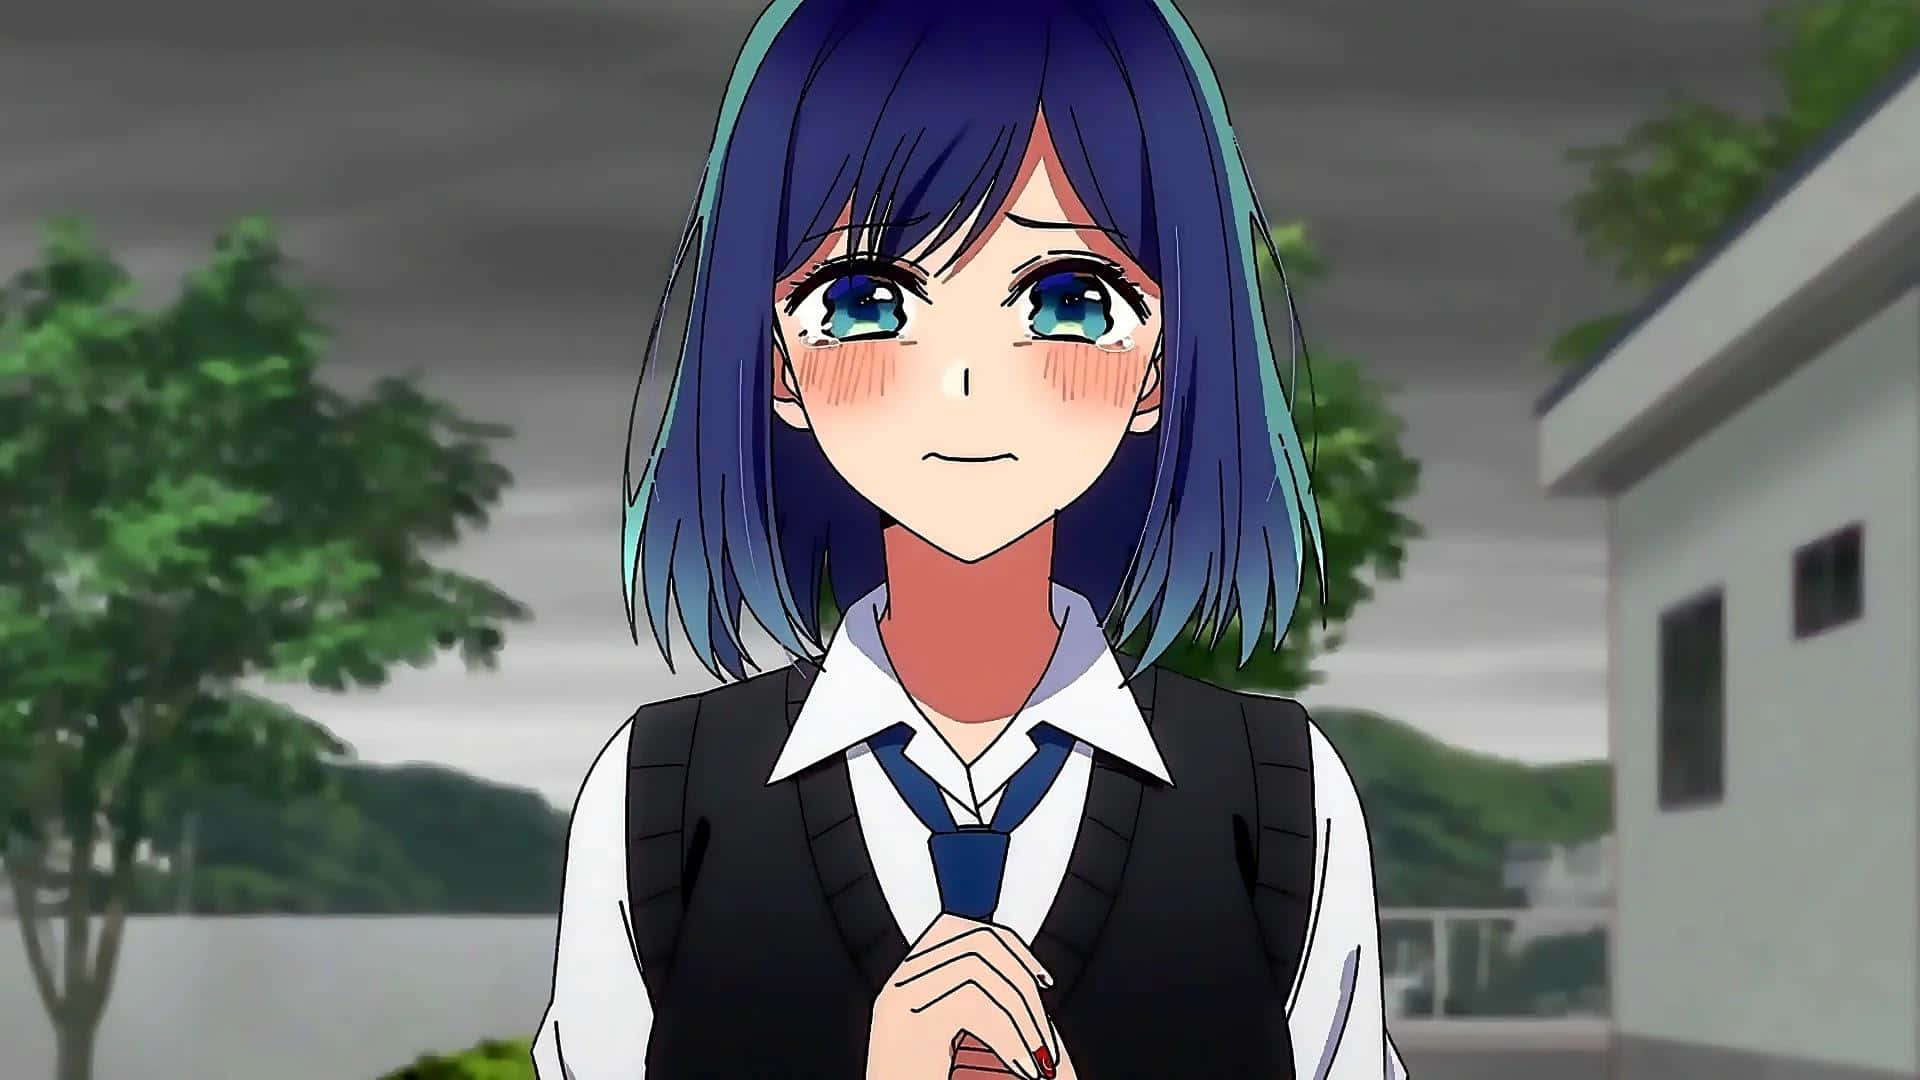 Anime Girl With Blue Hair And Teary Eyes Wallpaper